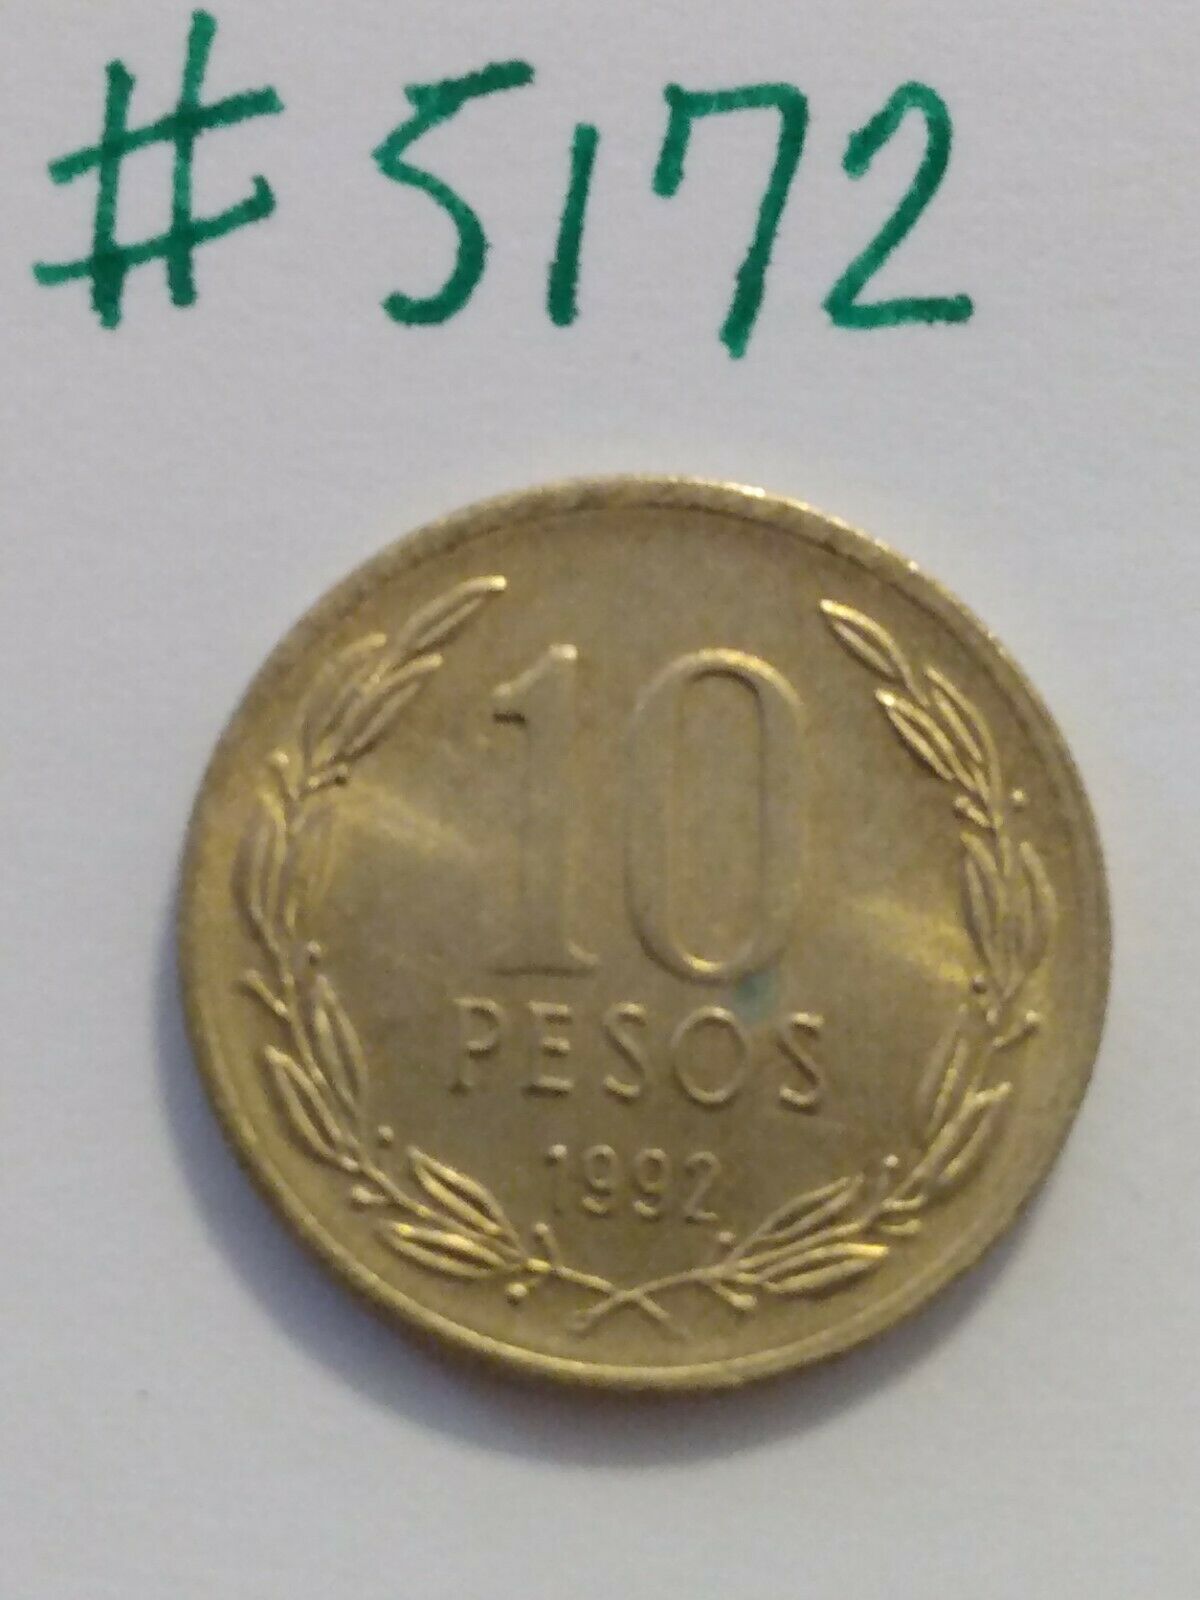 🇨🇱🇨🇱 1992 Chile 10 Pesos Coin Excellent Toning And Details 🇨🇱🇨🇱